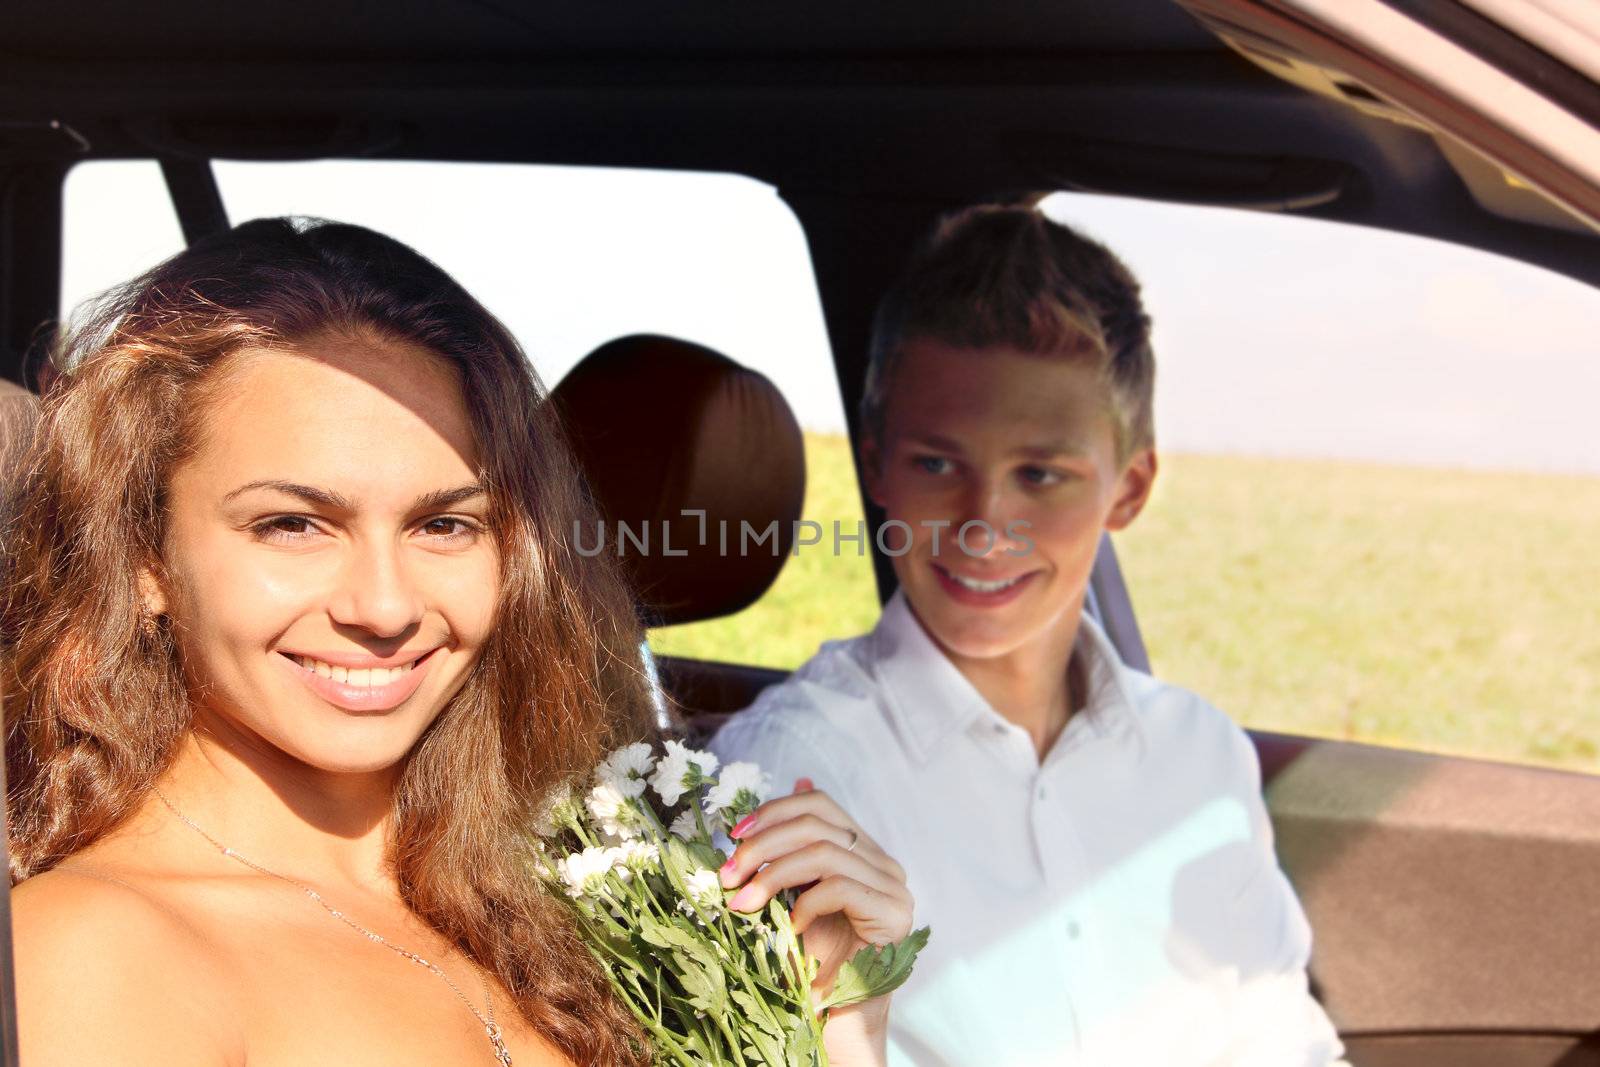 Young man and woman sitting in car and smiling